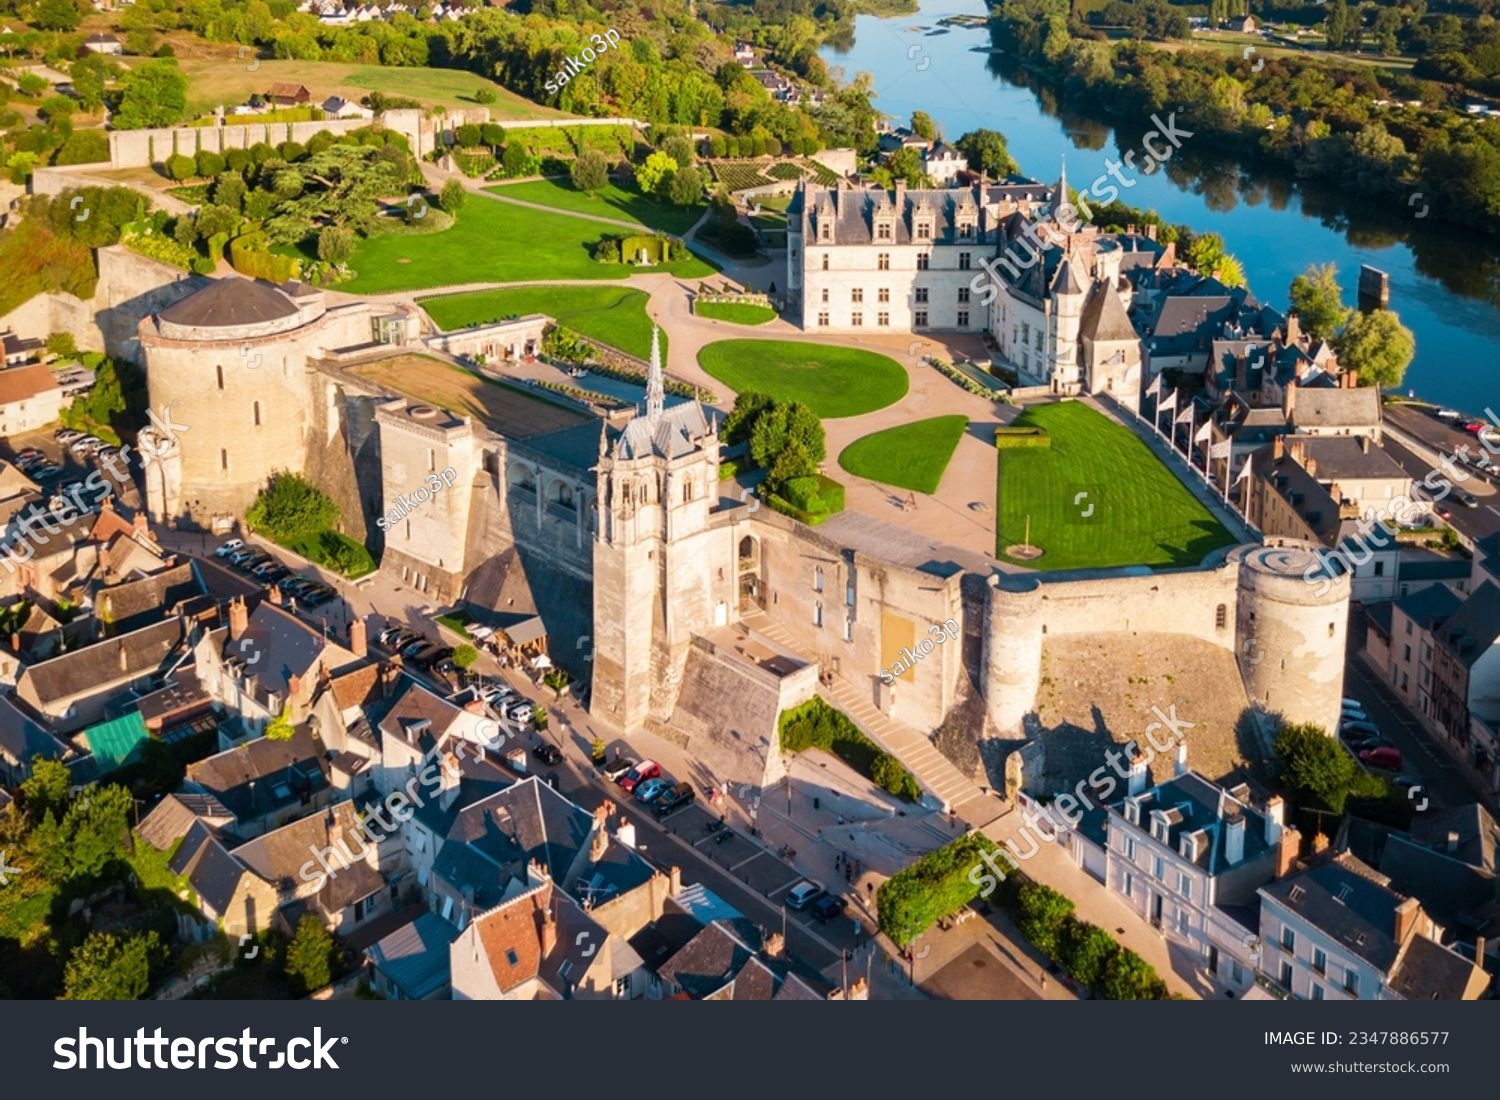 Chateau d'Amboise aerial panoramic view. It is a chateau in Amboise city, Loire valley in France. #2347886577